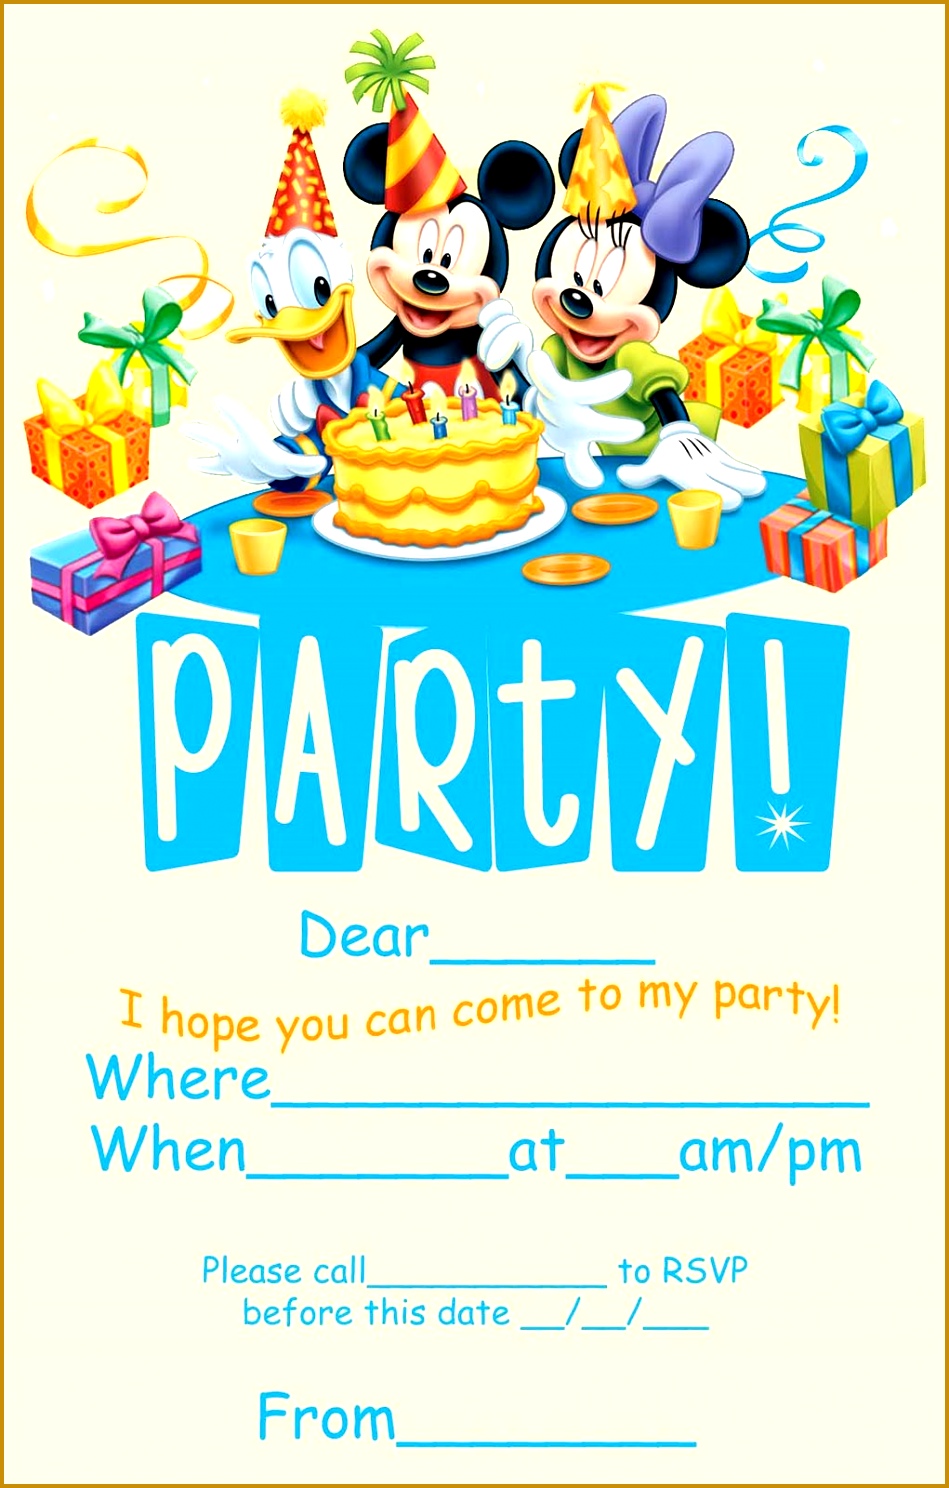 Disney Birthday Invitations Including Awesome Birthday Invitation Templates With Full Pleasure Environment 16 source pexels cÐ¾m 1488949